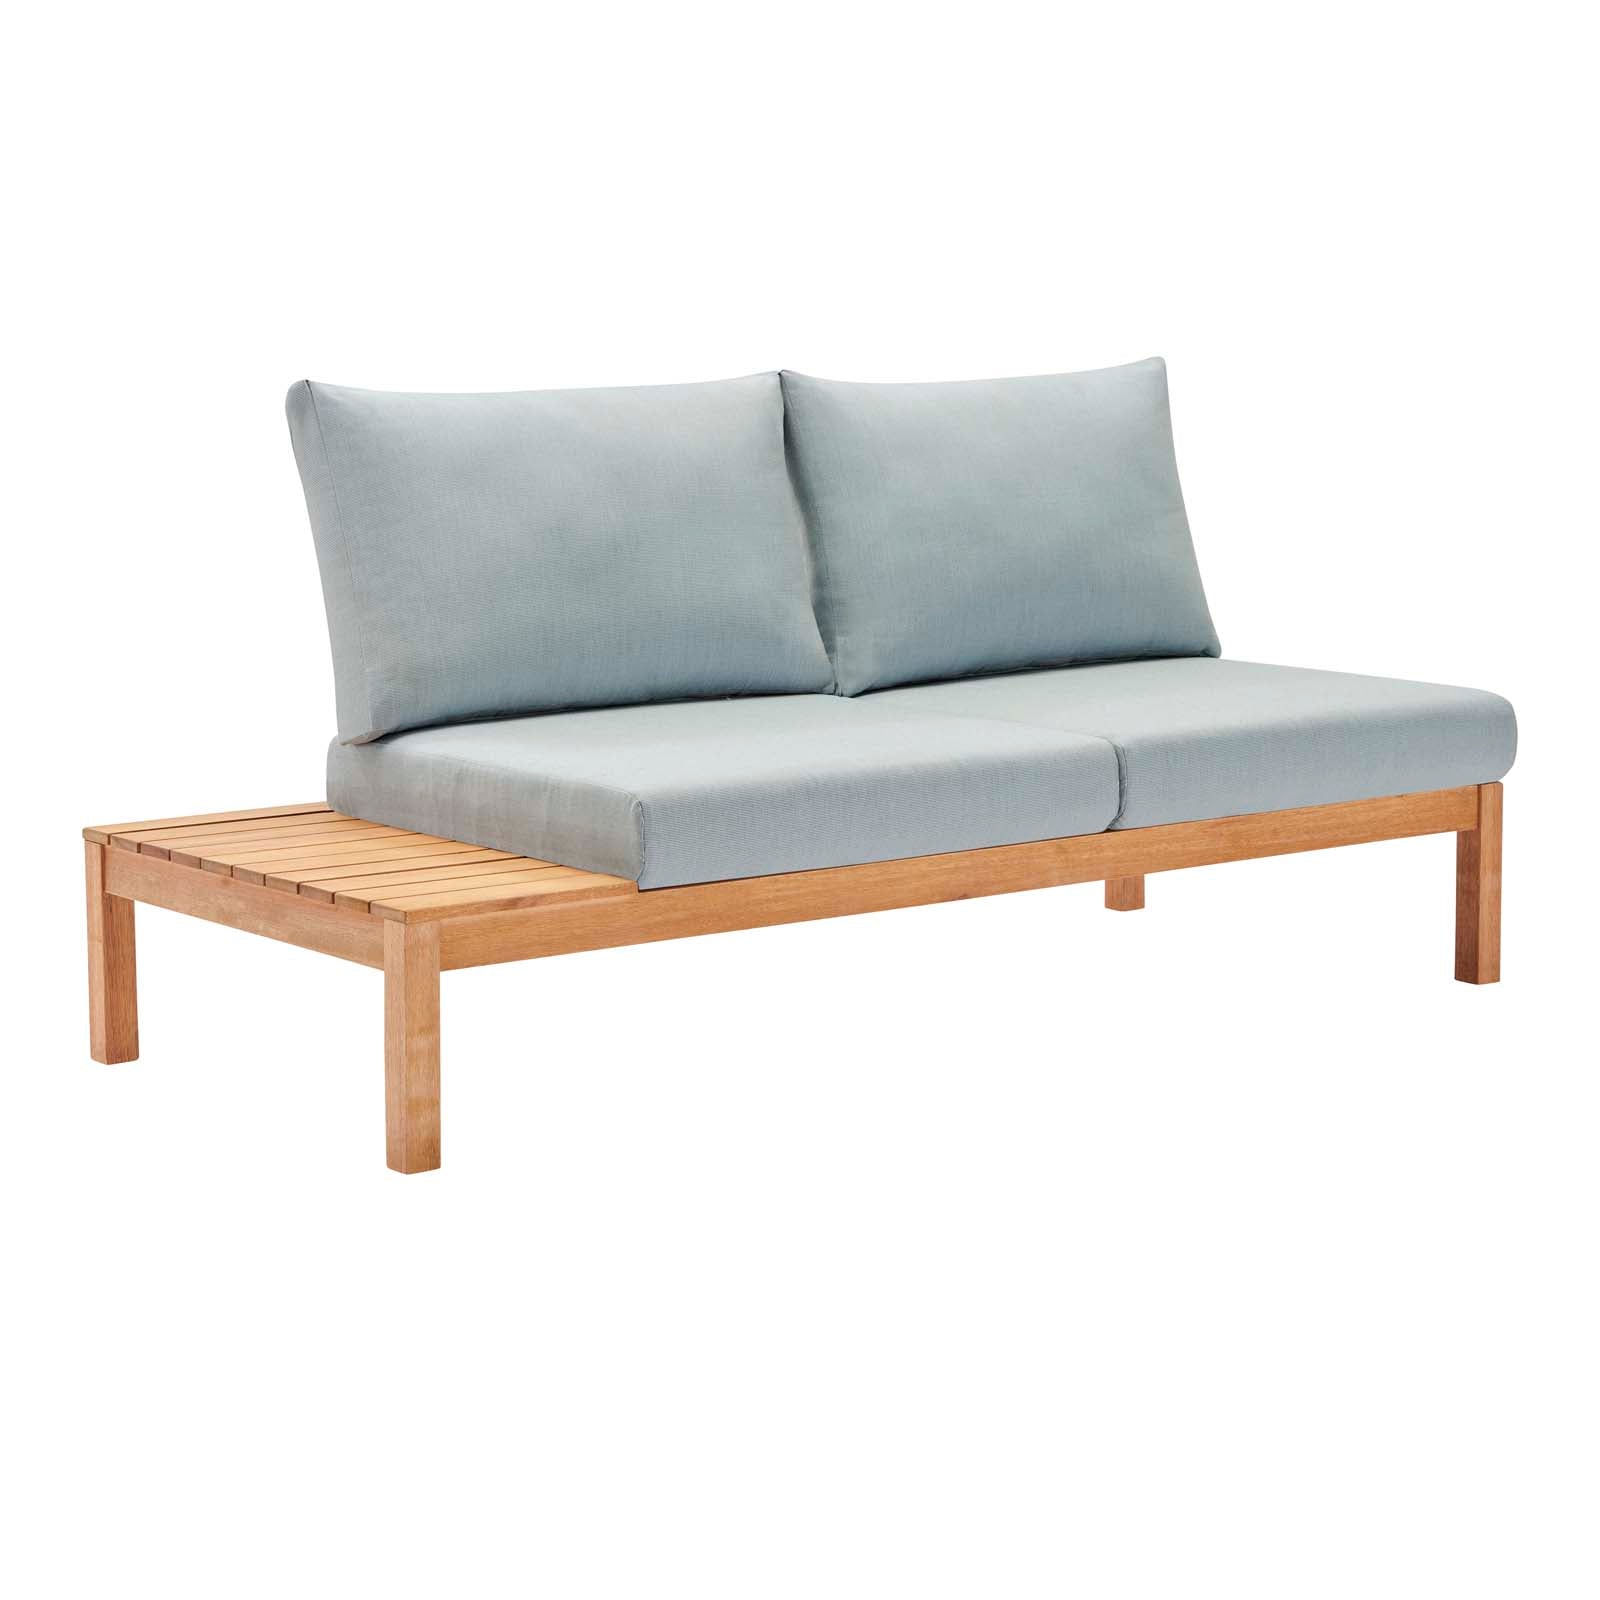 Freeport Karri Wood Outdoor Patio Loveseat with Right-Facing Side End Table - East Shore Modern Home Furnishings